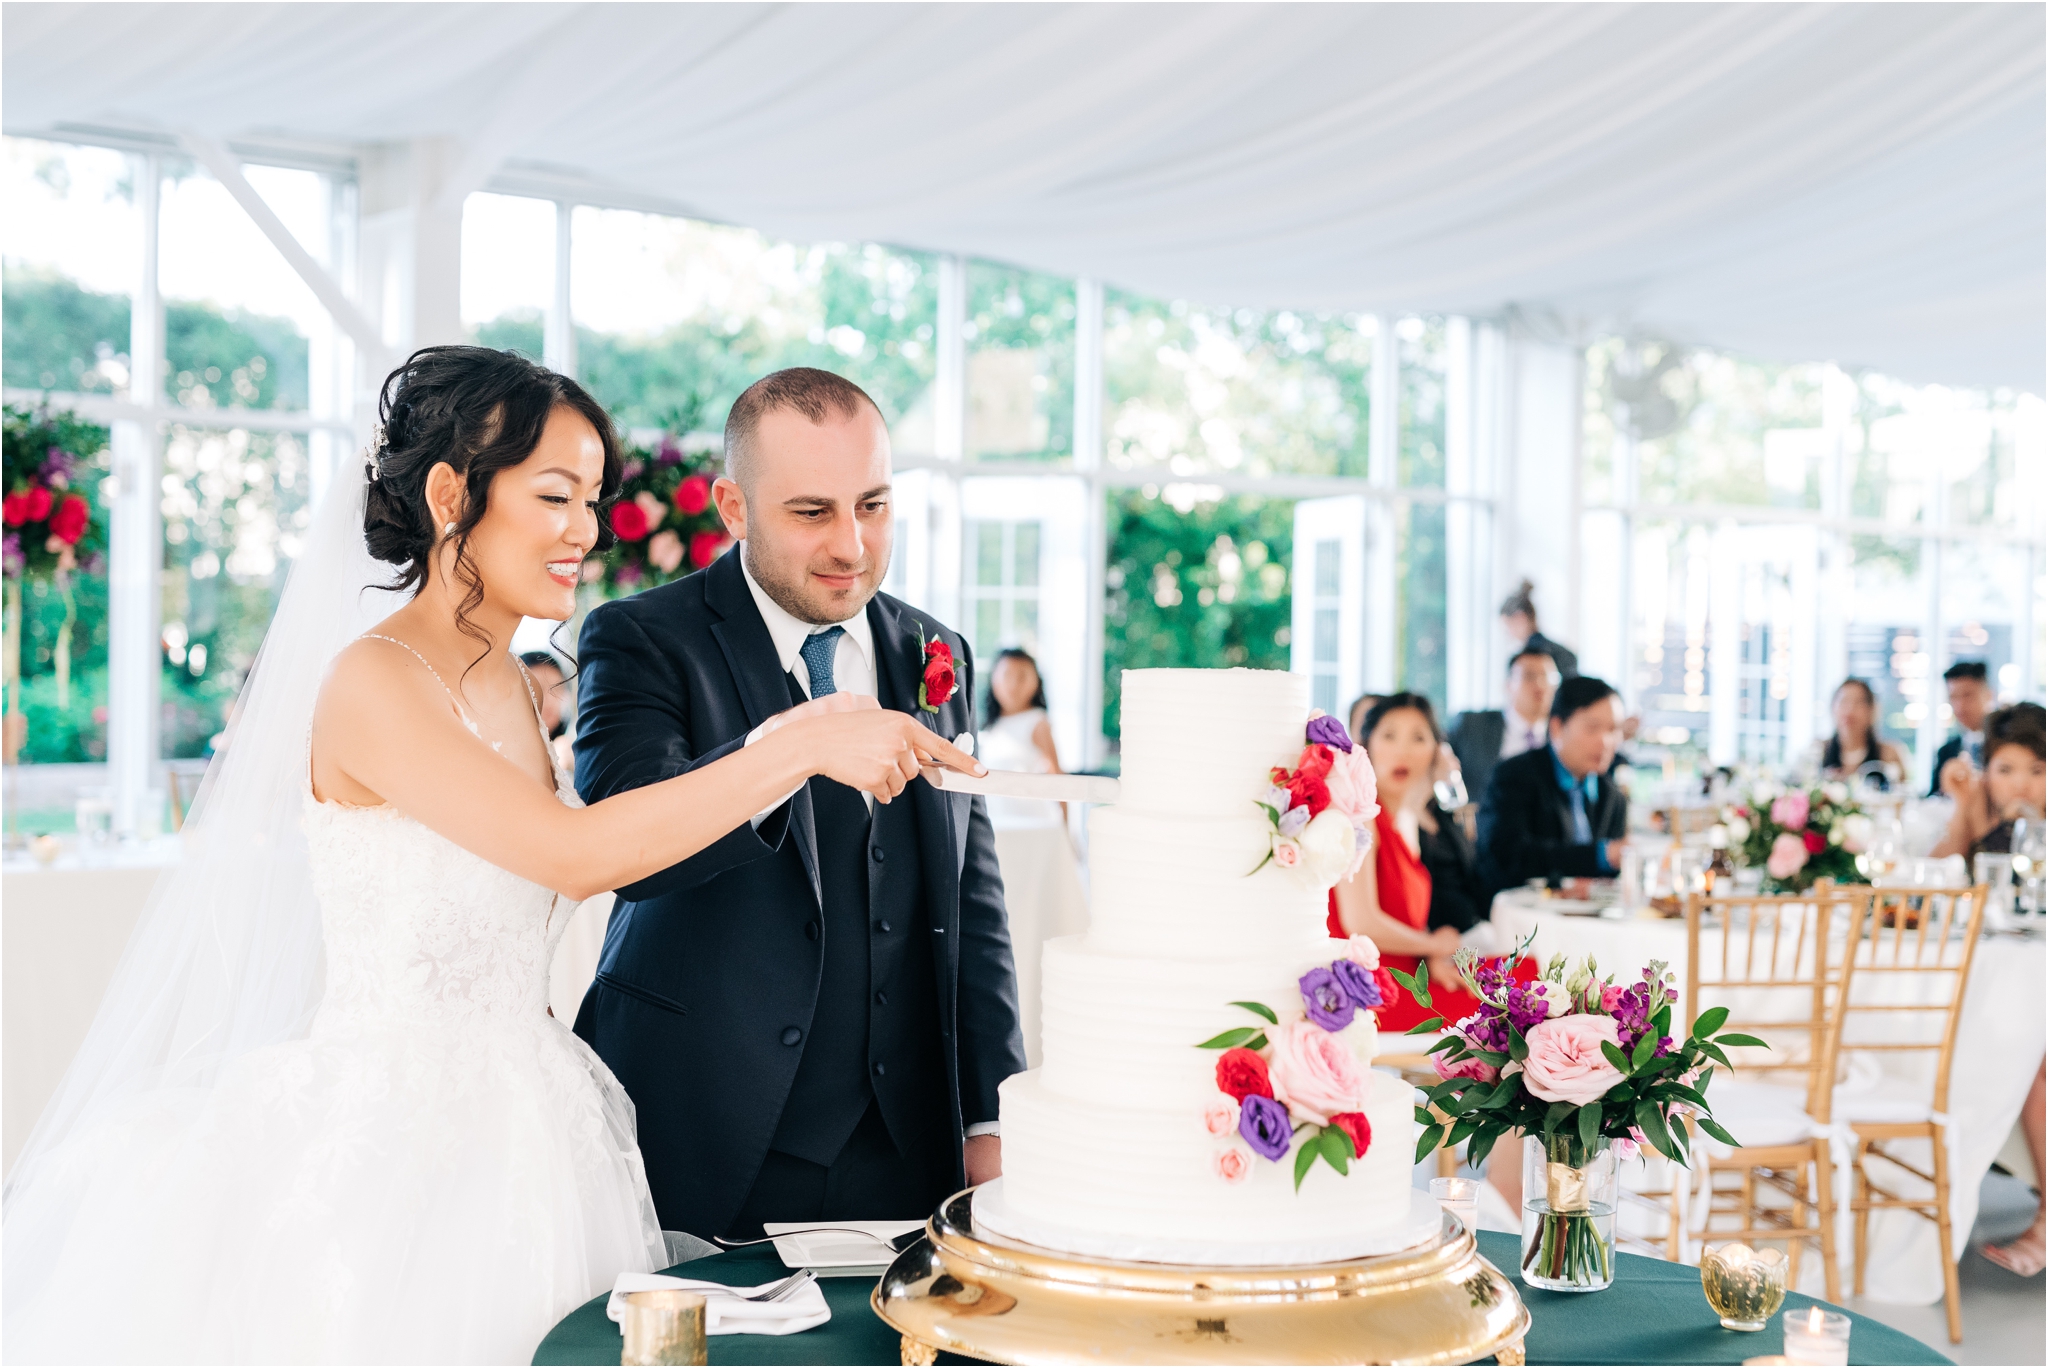 cake cutting in the glass house